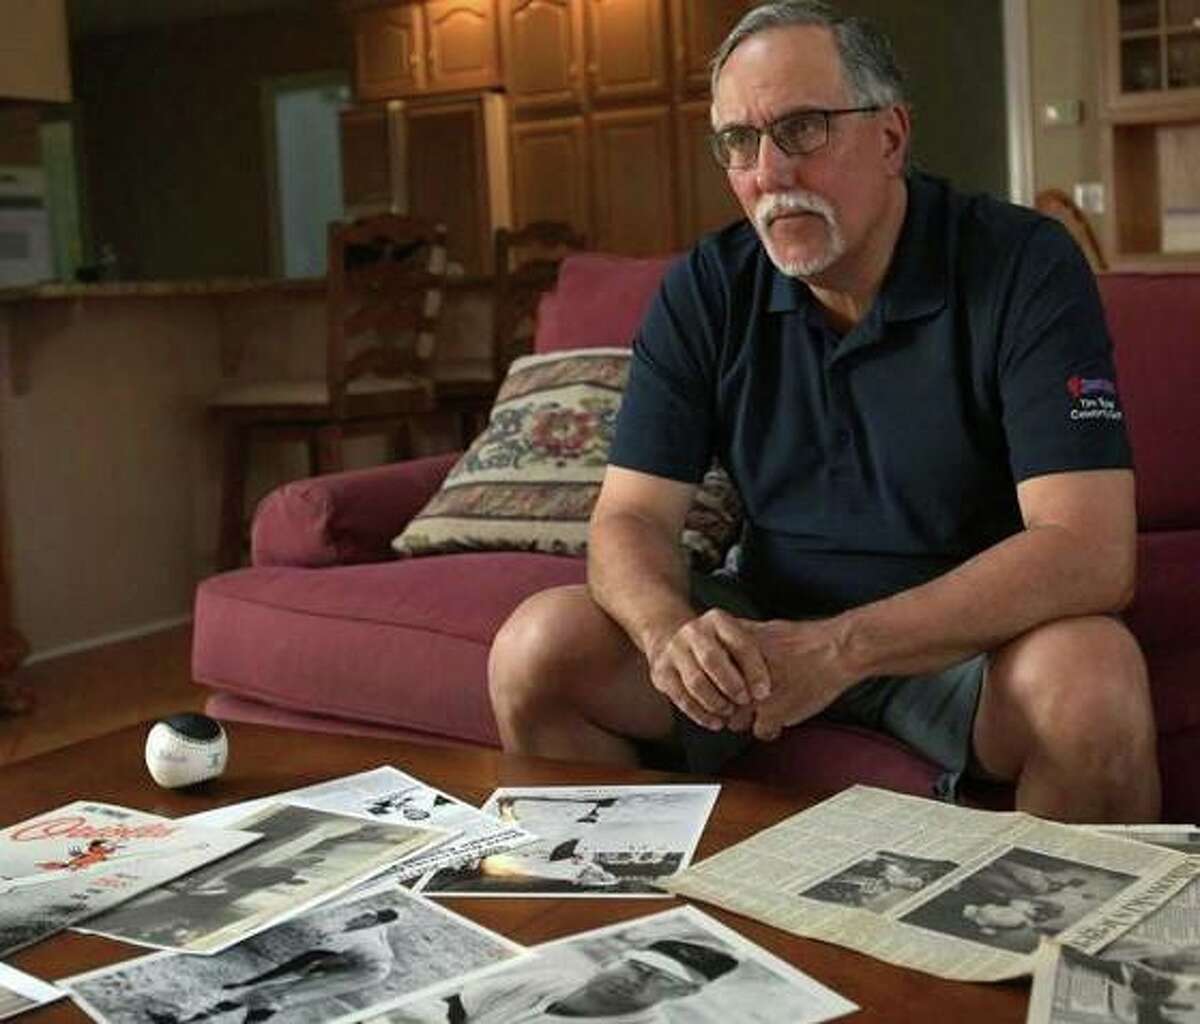 Sports writer and film producer Tom Chiappetta of Norwalk talks about his first documentary film, "Far From Home: The Steve Dalkowski Story,” which premieres on Connecticut Public Television at 7 p.m. Saturday, Oct. 10.